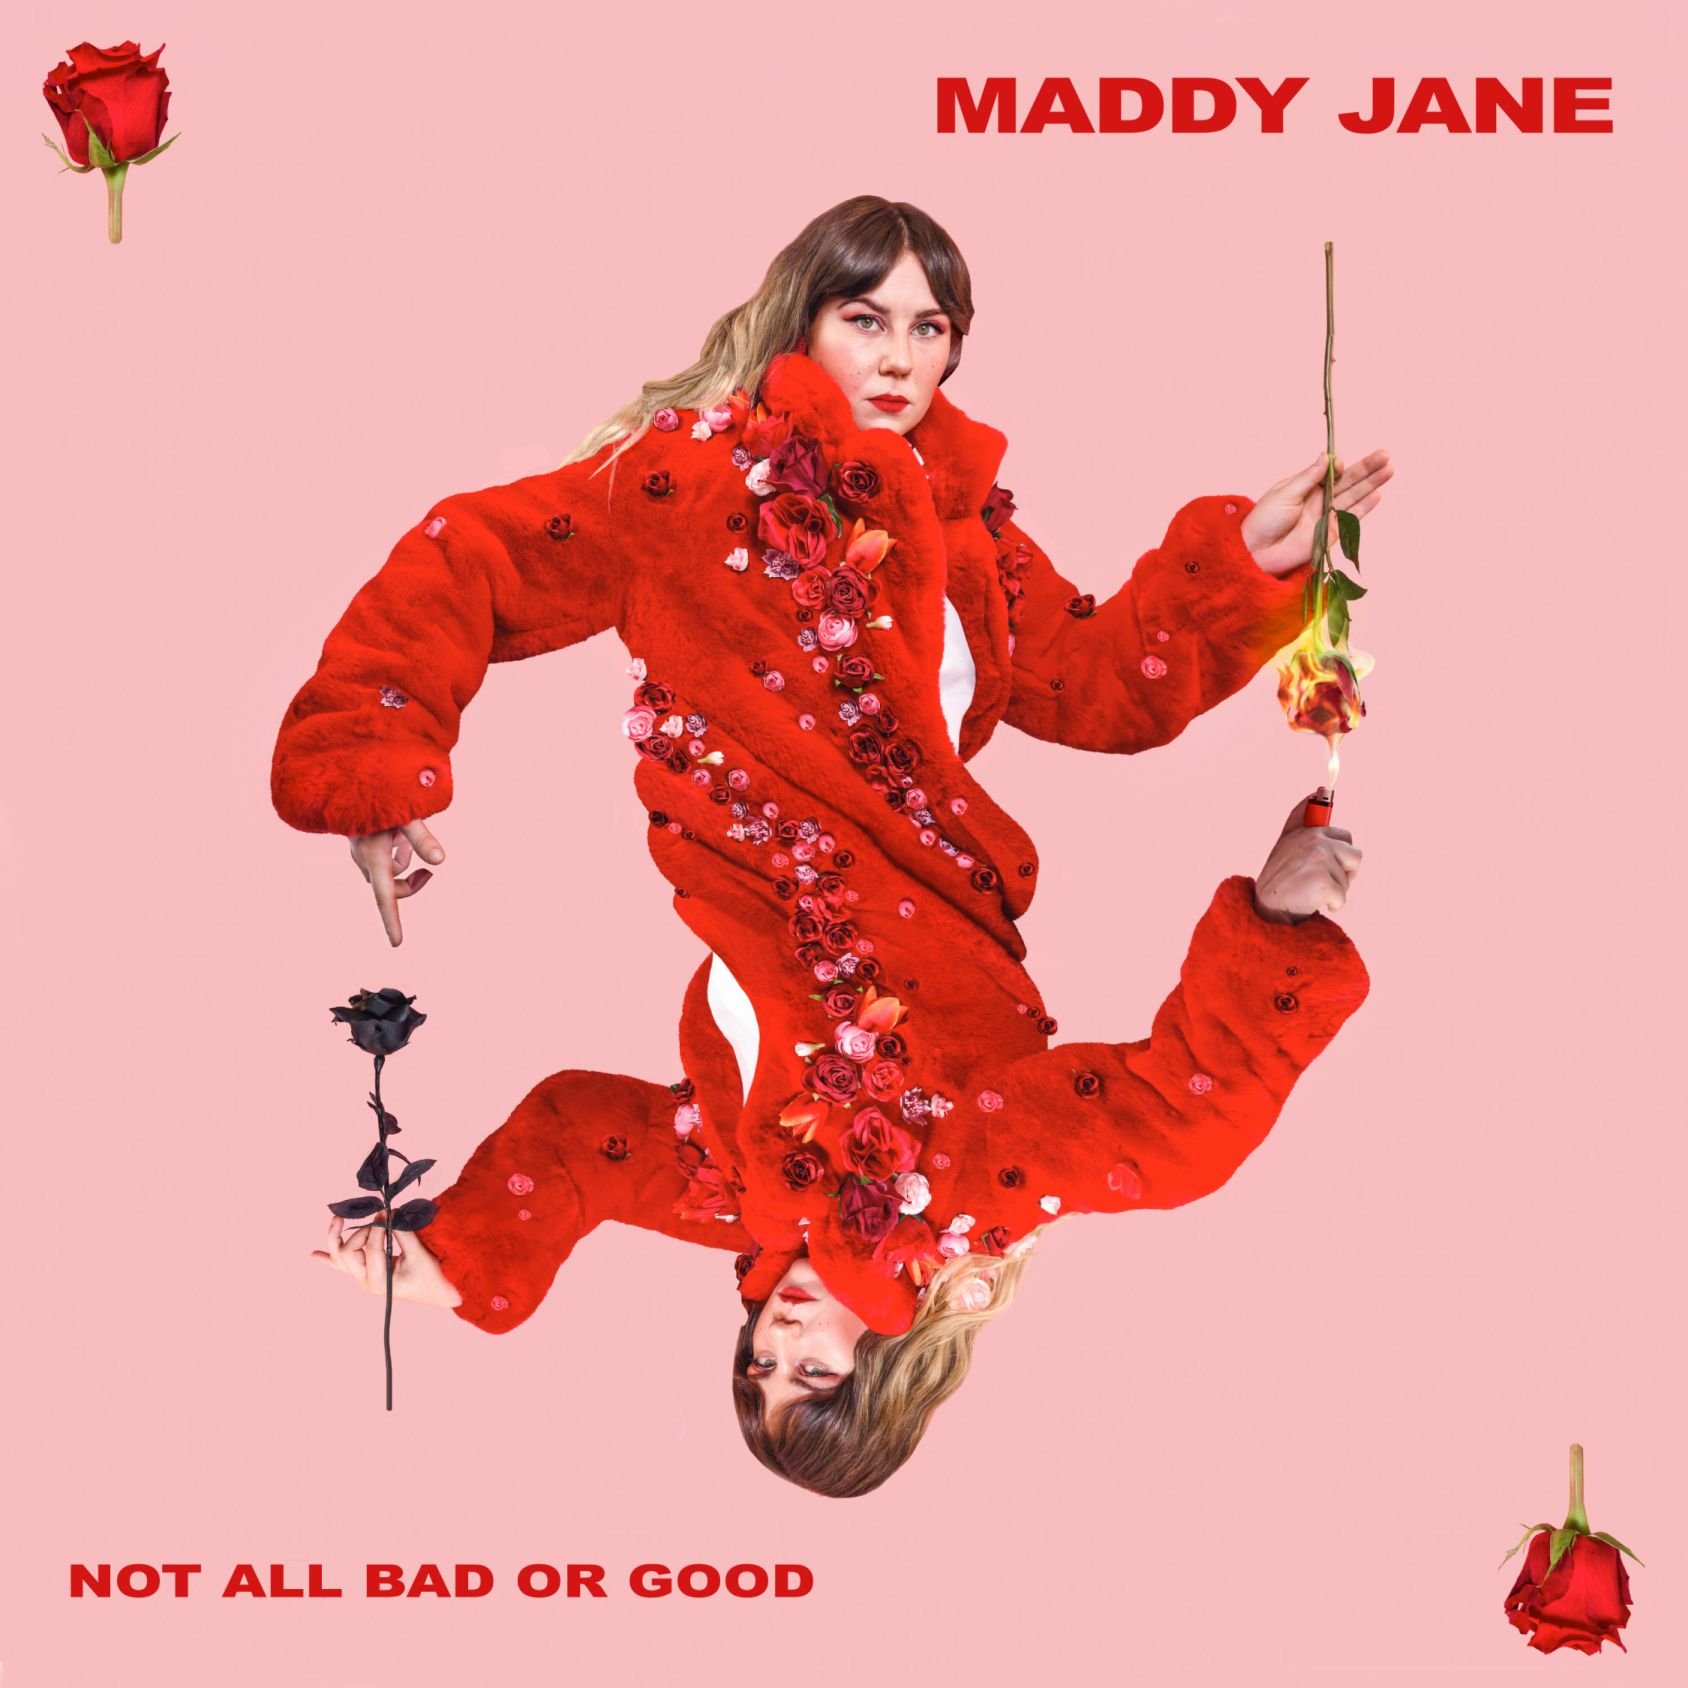 Maddy Jane releases debut album ‘Not All Bad Or Good’